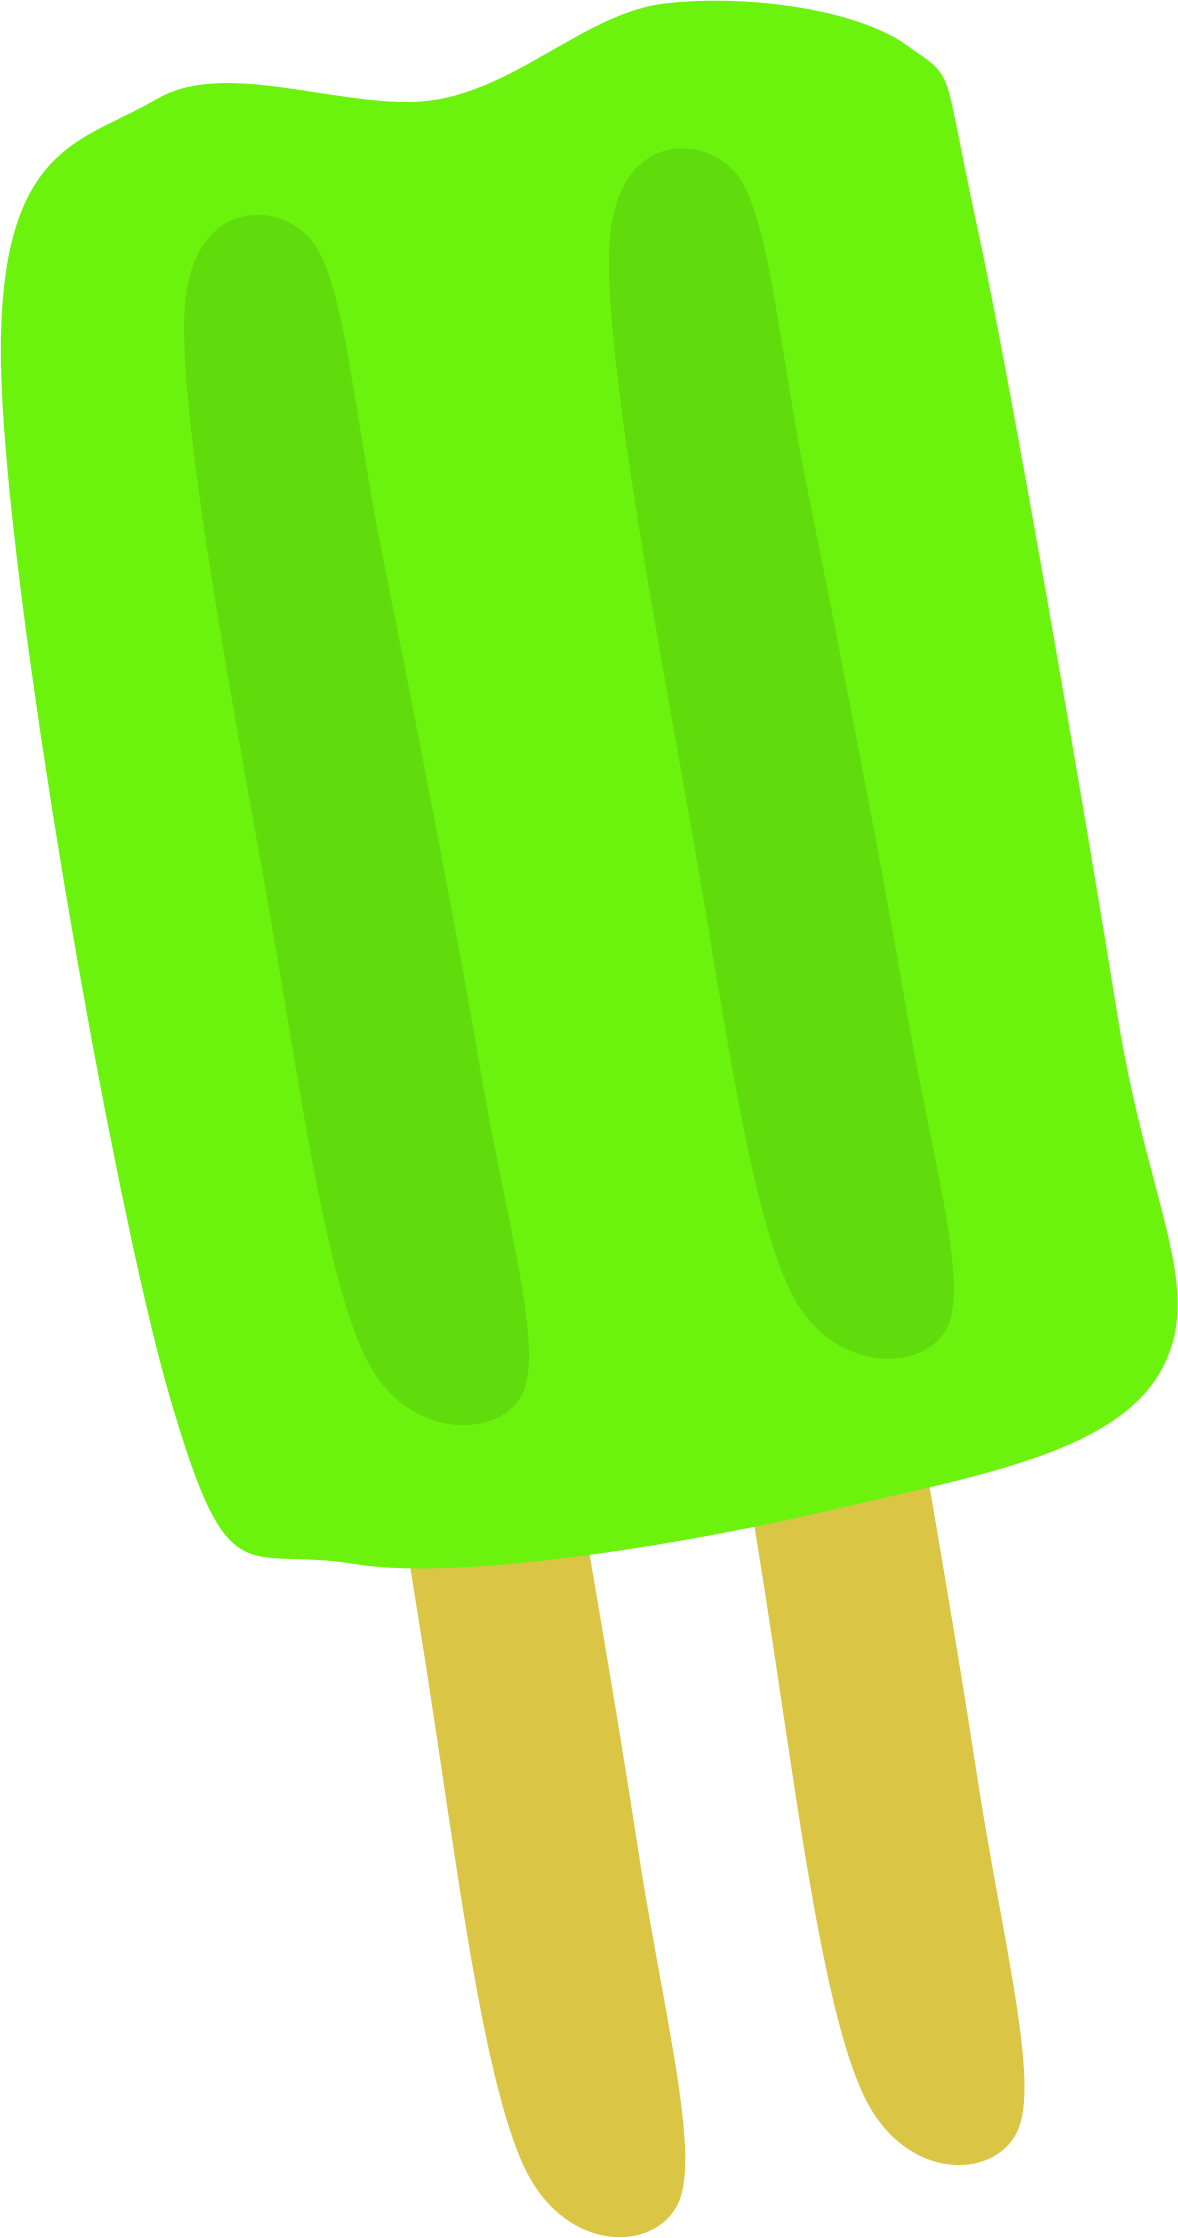 Popsicle Images Illustrations Photos Hd Photo Clipart